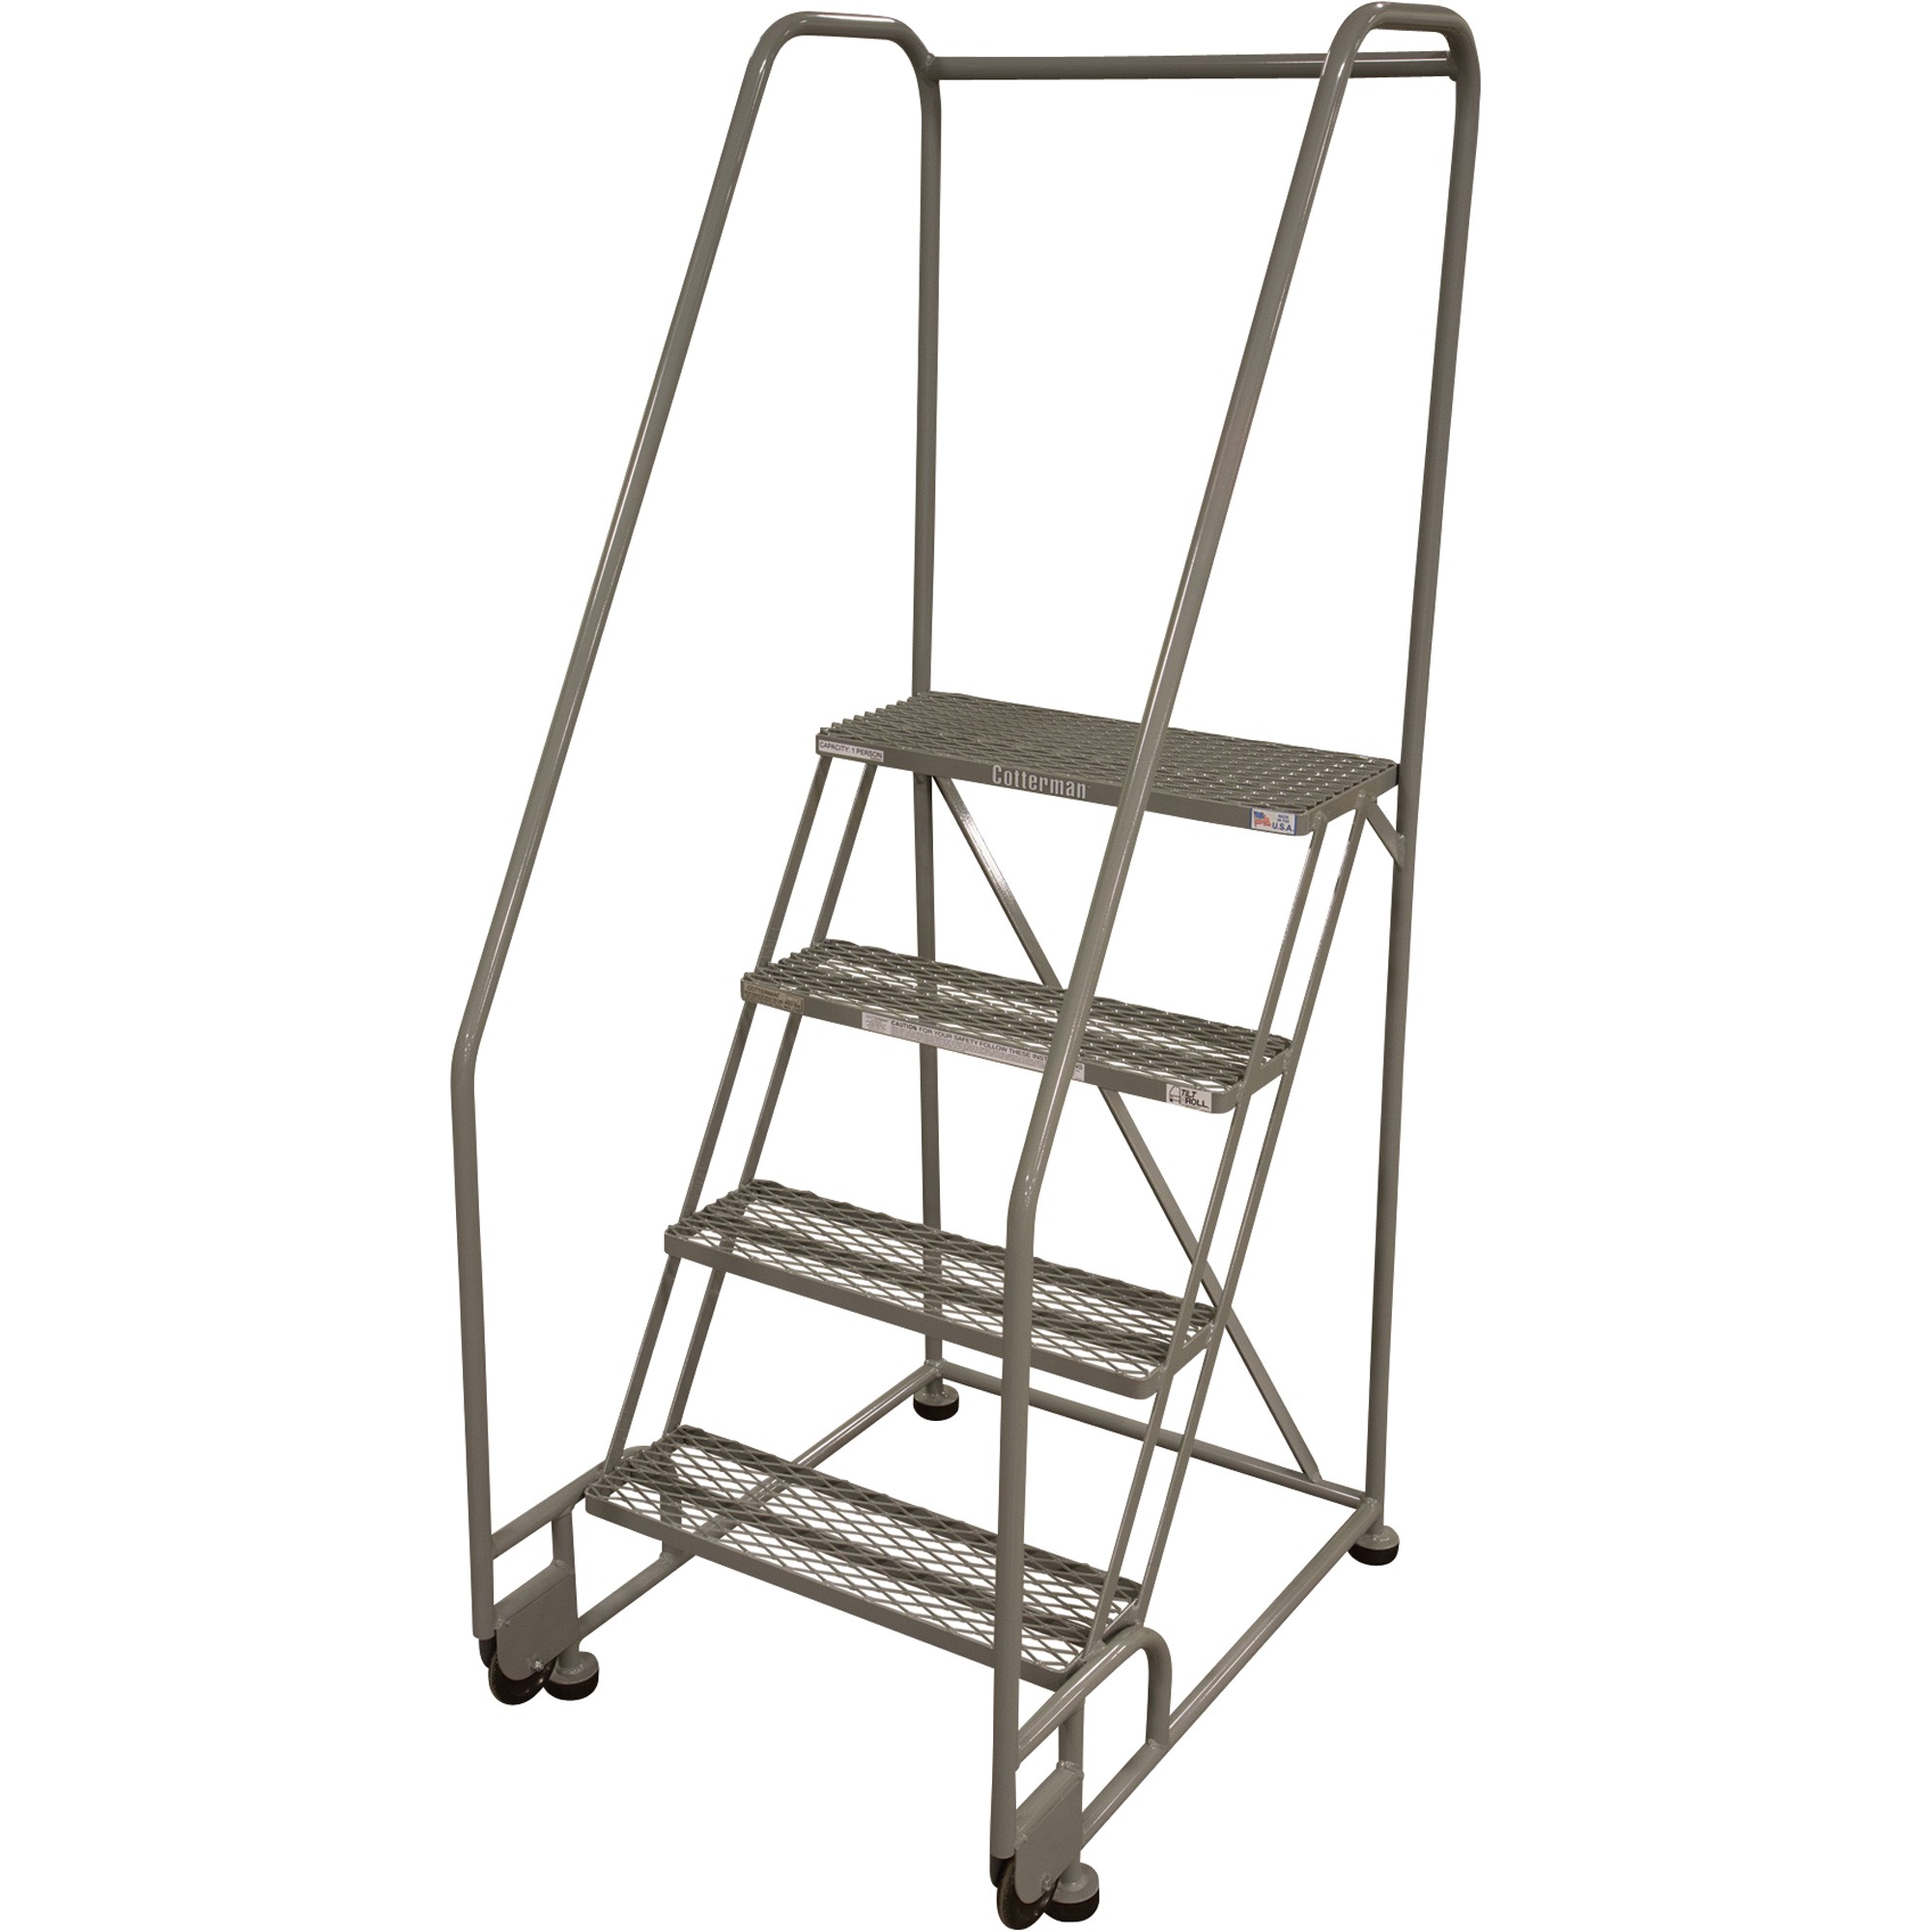 cotterman rolling ladder 40in max height model 4tr26a1e10b8c1p6